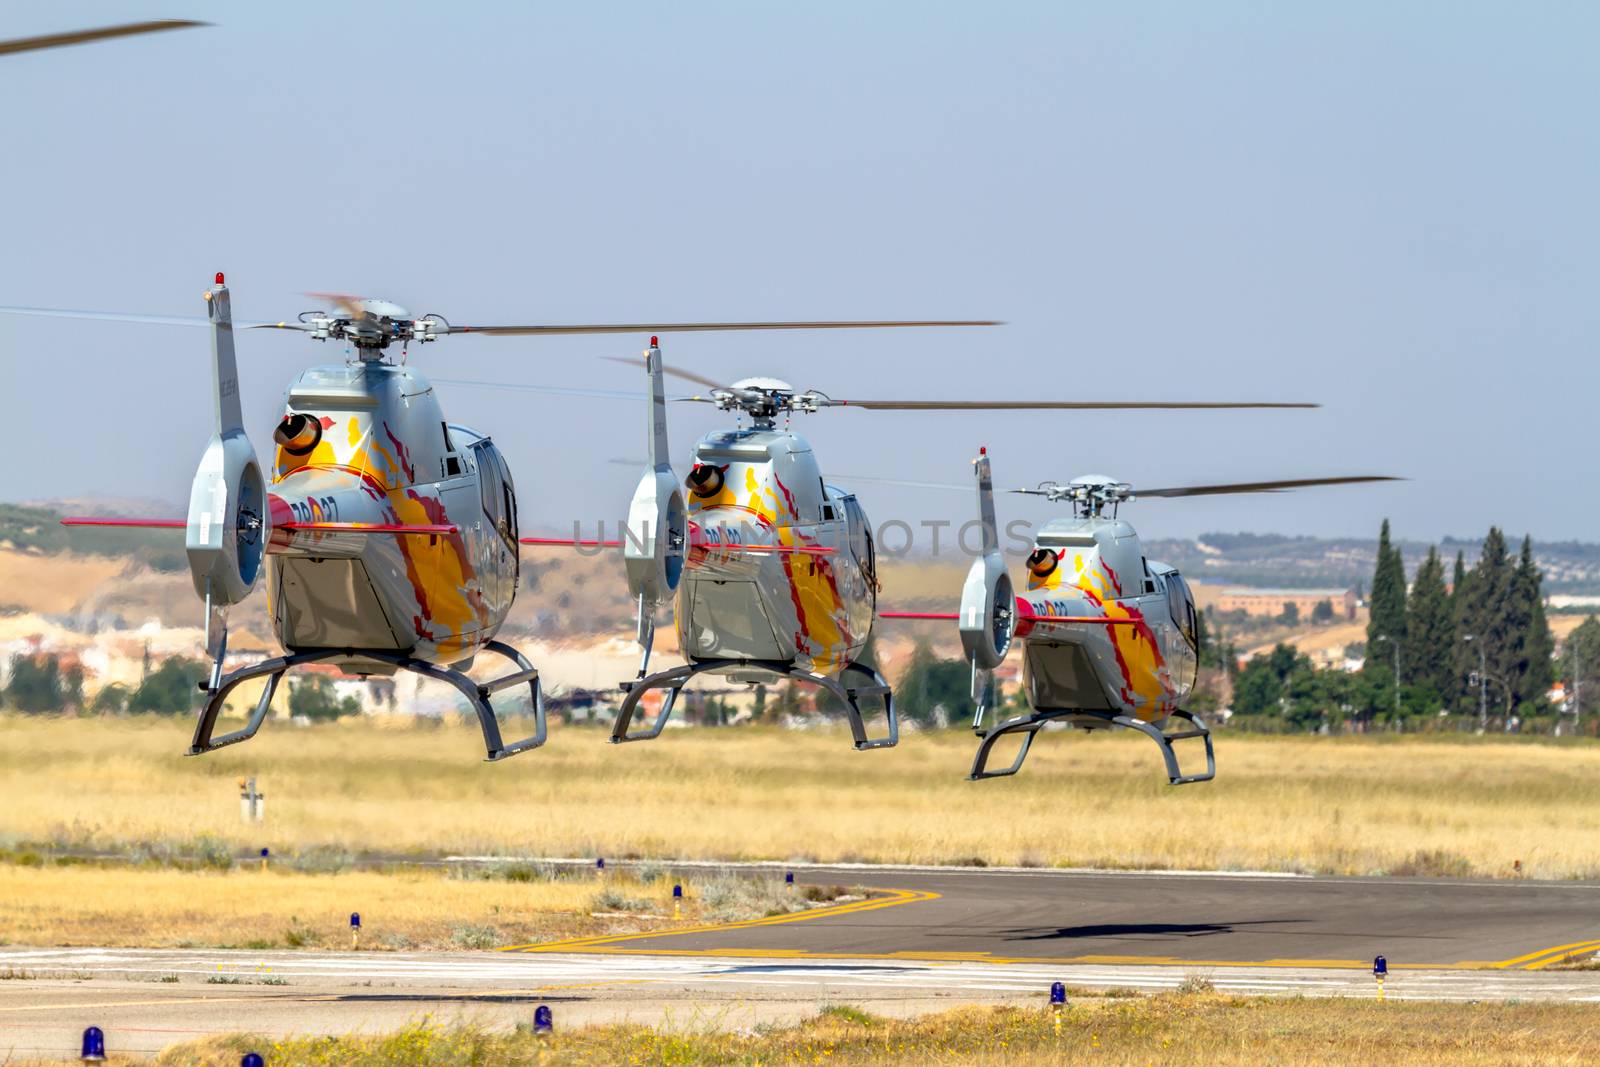 GRANADA, SPAIN-MAY 18: Helicopters of the Patrulla Aspa taking part in a exhibition on the X Aniversary of the Patrulla Aspa of the airbase of Armilla on May 18, 2014, in Granada, Spain